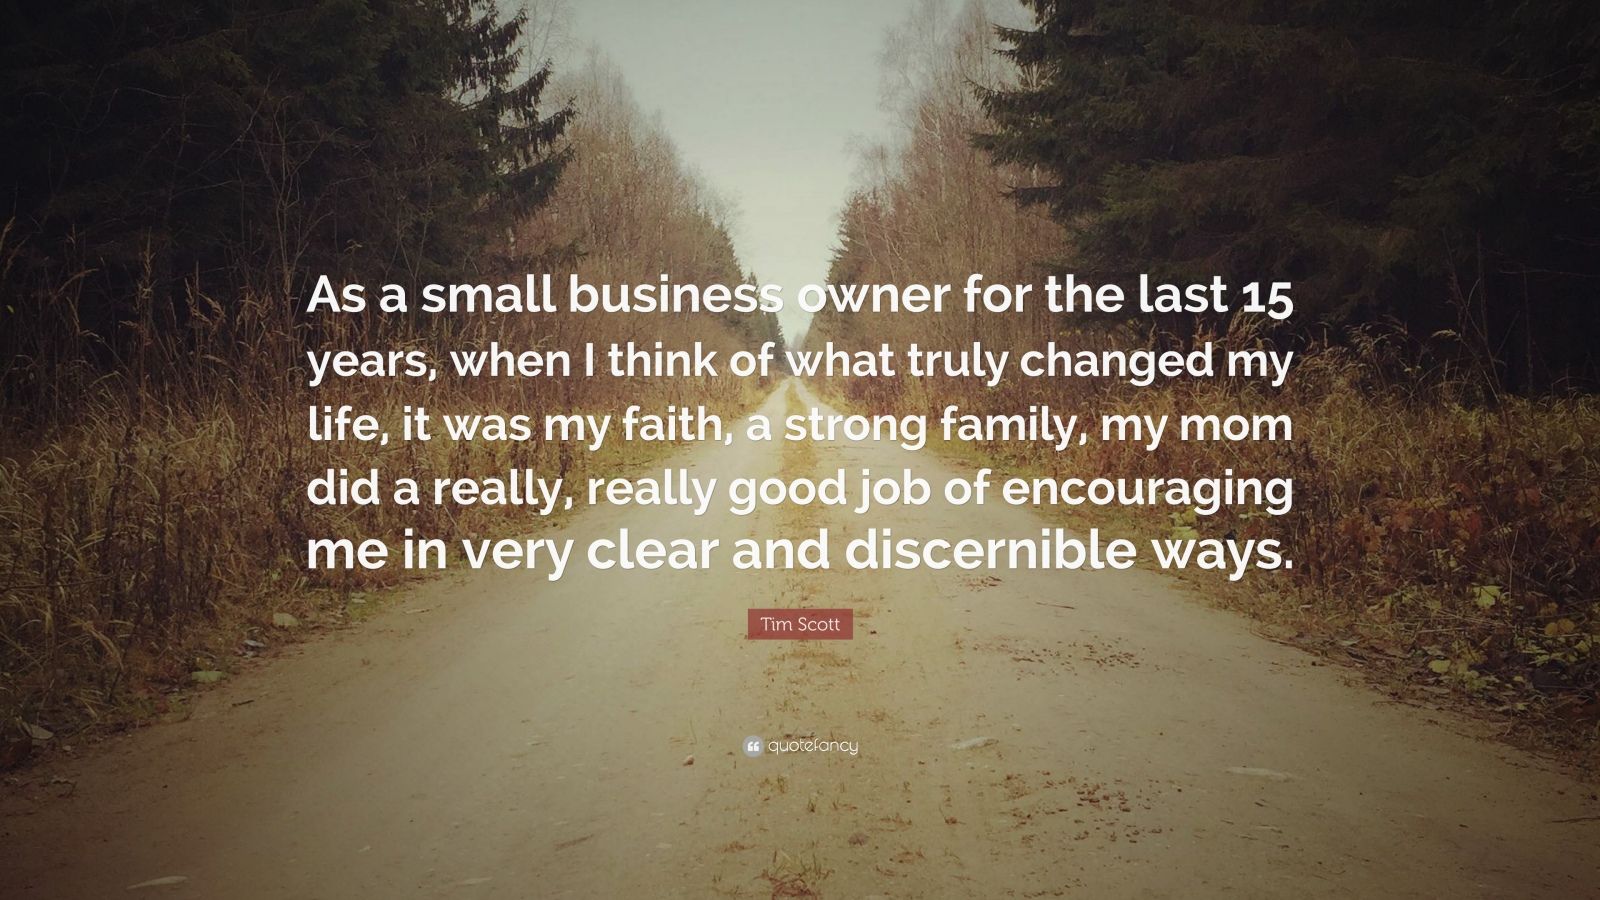 Tim Scott Quote: “As a small business owner for the last 15 years, when